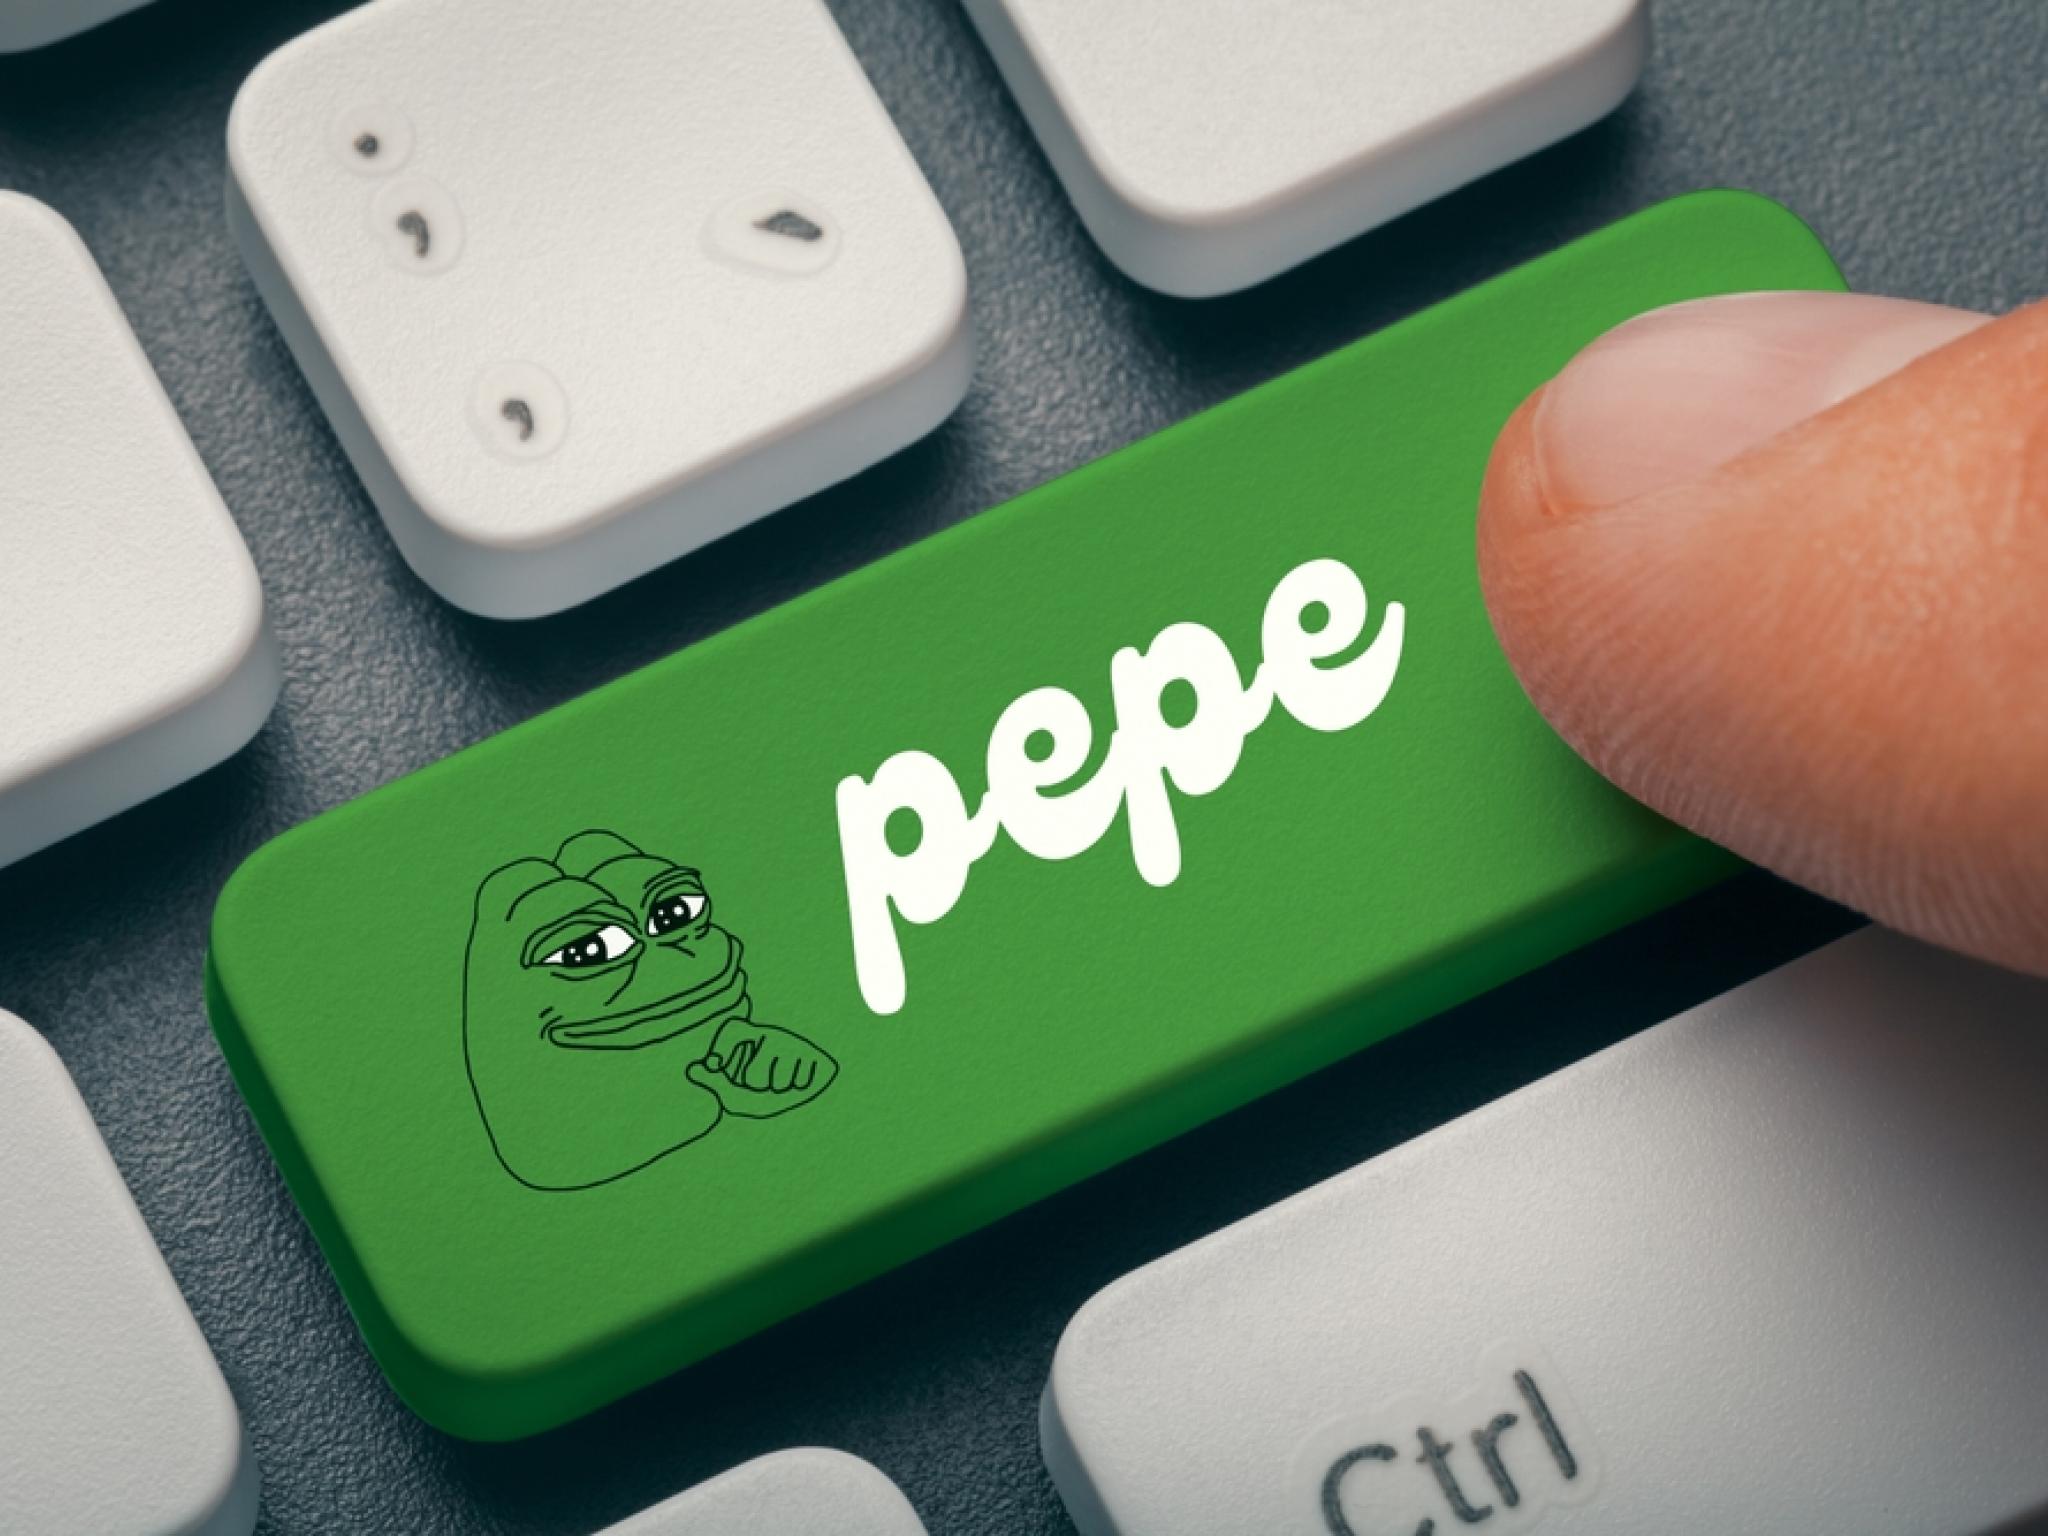  pepe-up-42-on-the-week-dont-buy-dogs-catsbuy-real-memes-says-crypto-trader 